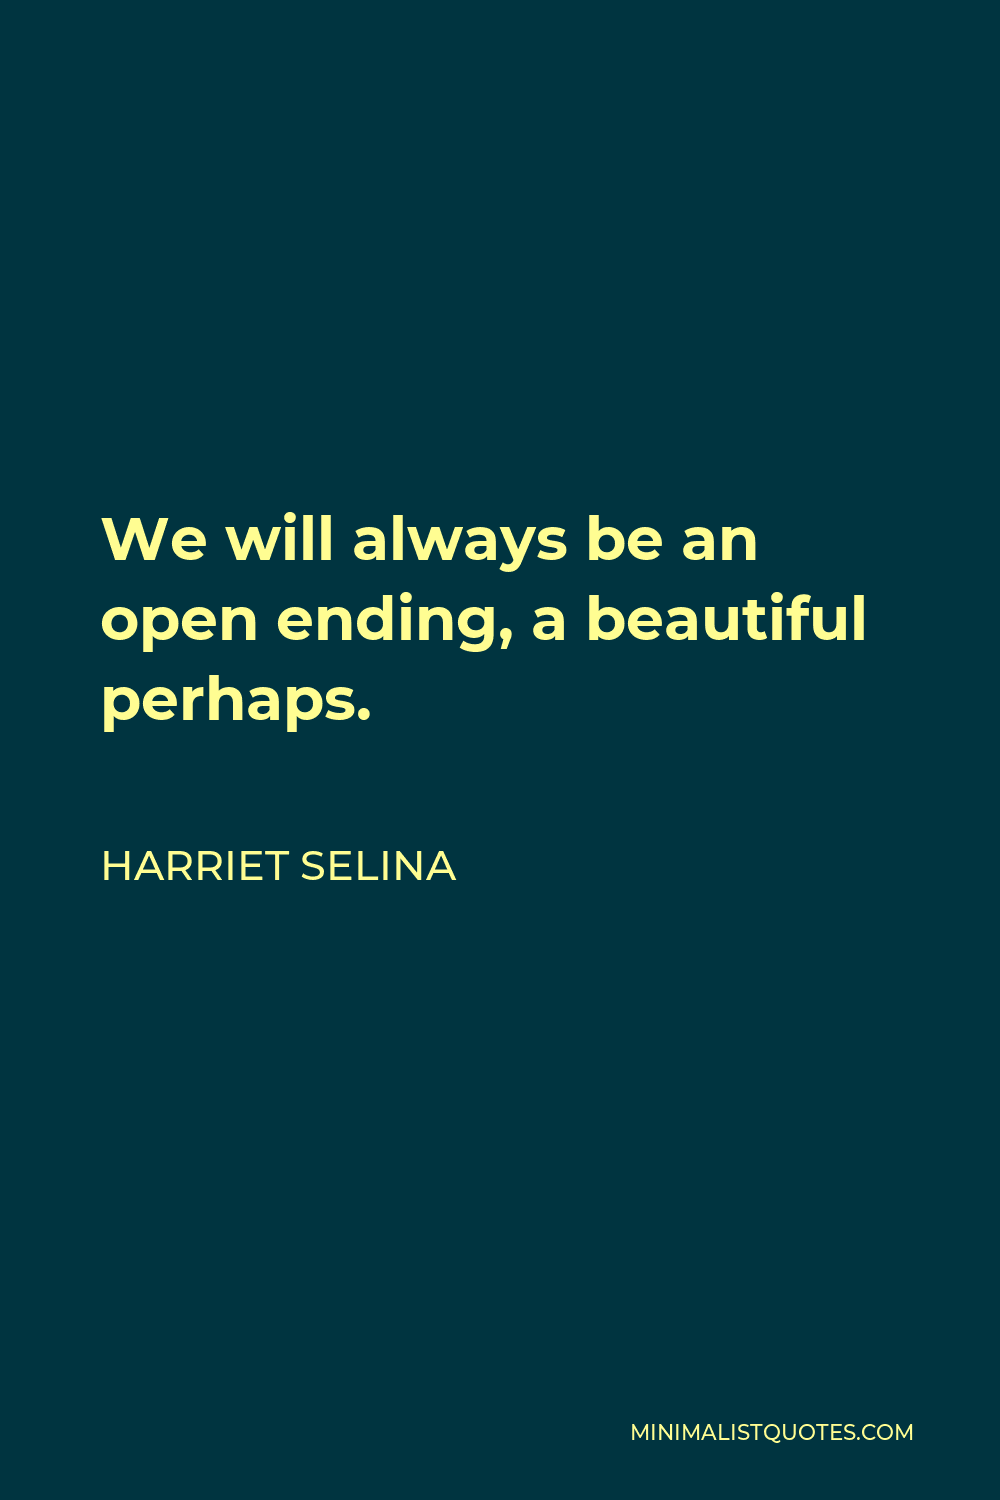 Harriet Selina Quote - We will always be an open ending, a beautiful perhaps.